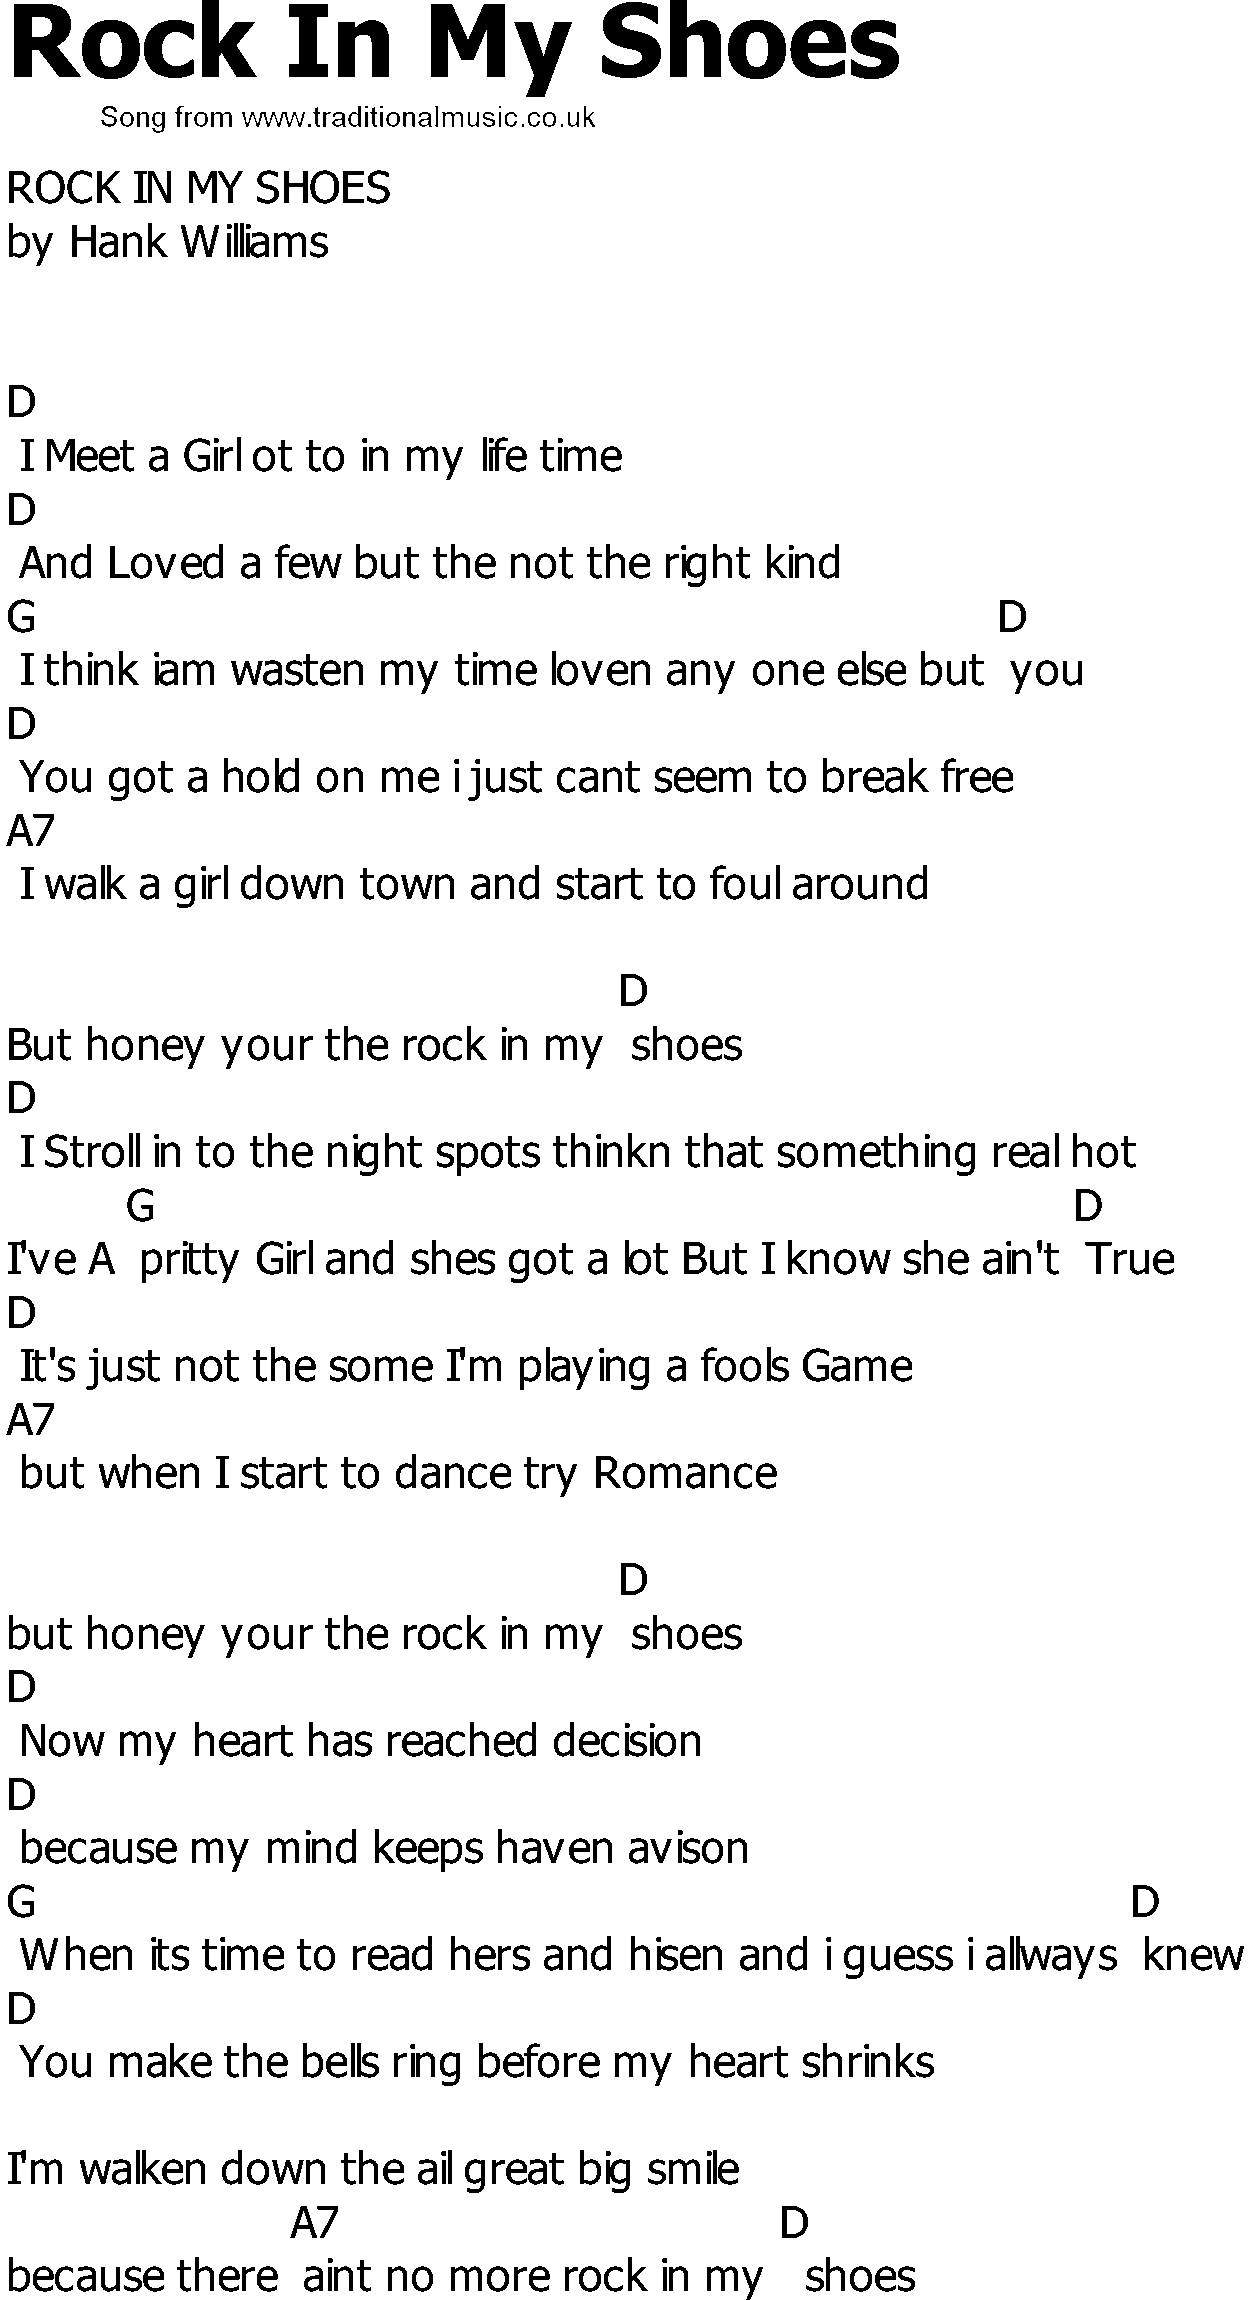 Old Country song lyrics with chords - Rock In My Shoes